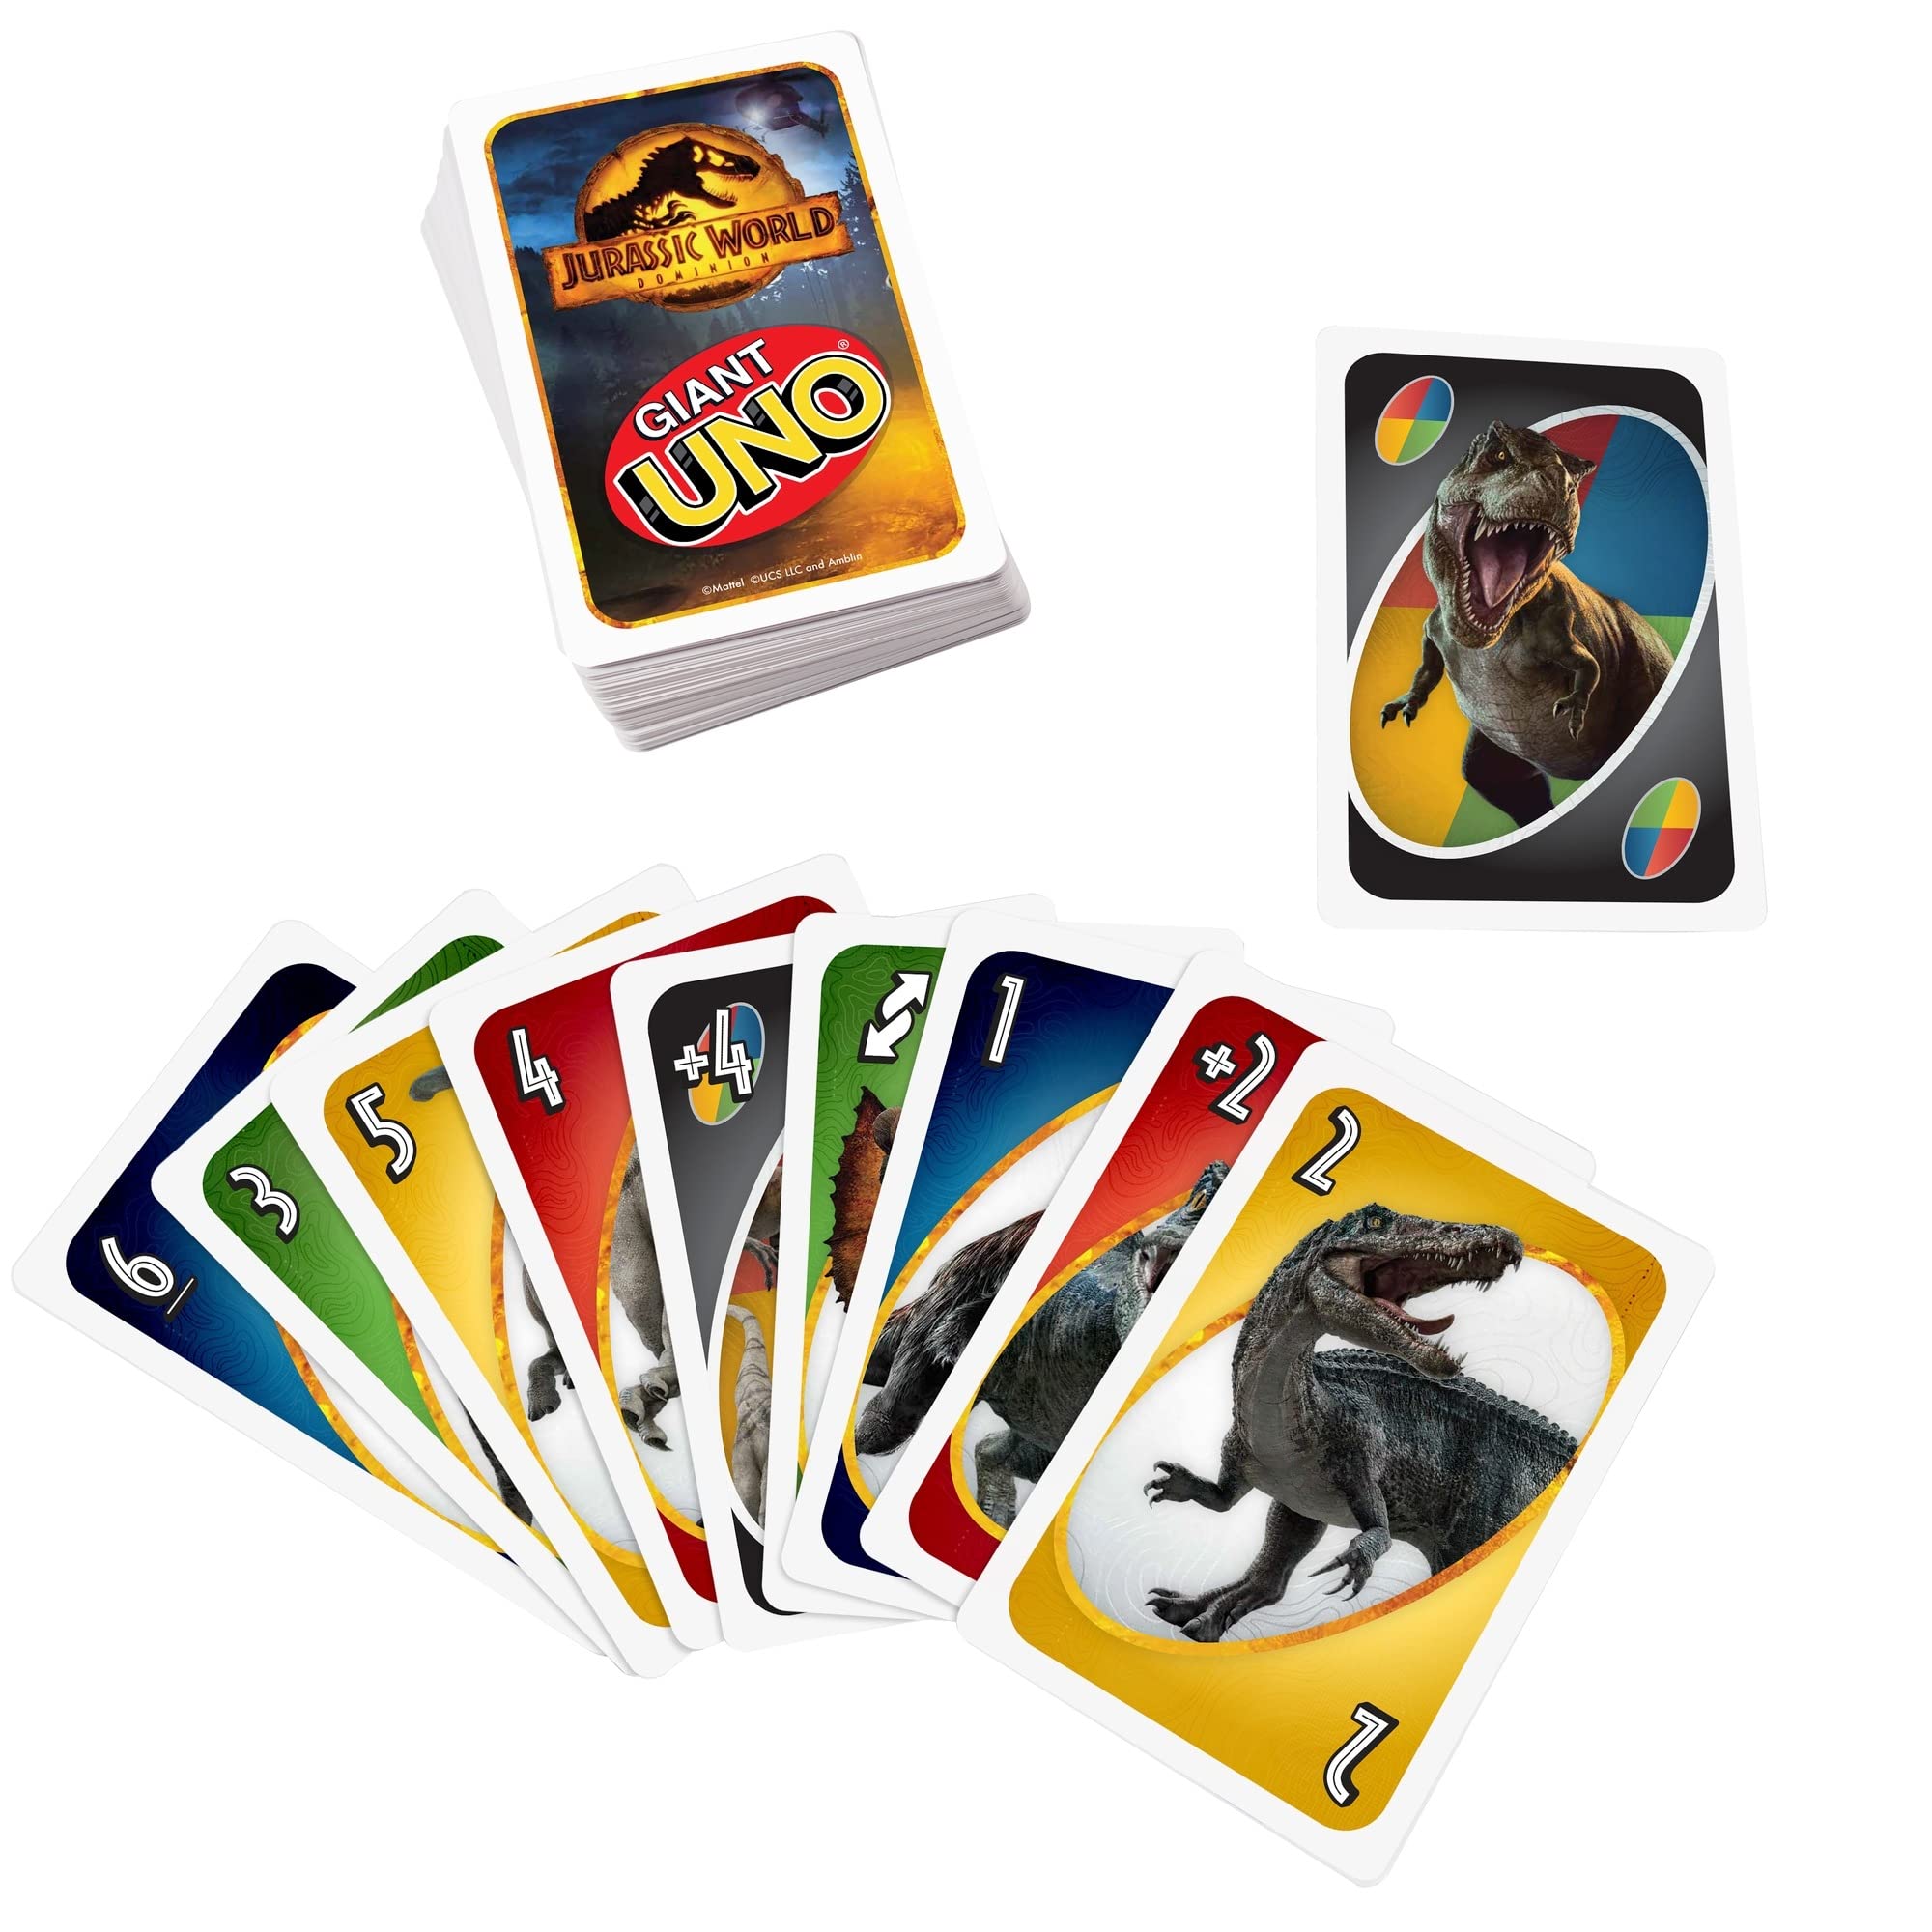 Mattel Games Giant UNO Jurassic World Domination Card Game for Kids & Game Night, Oversized Cards & Customizable Wild Cards